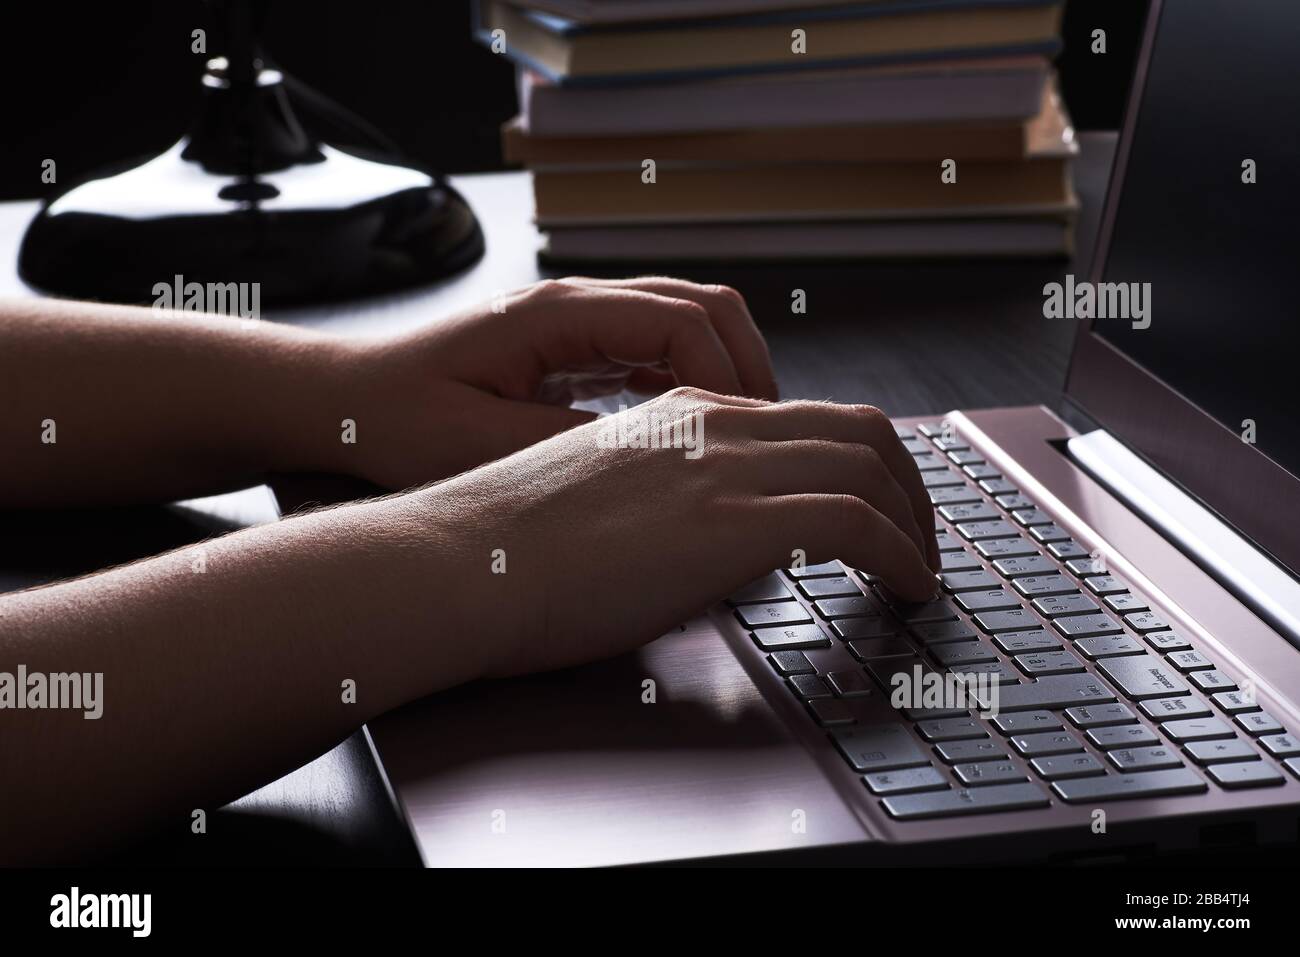 Still life of study or office at night under lamp light. Hands of young woman writer freelance typing on laptop keyboard. Stock Photo